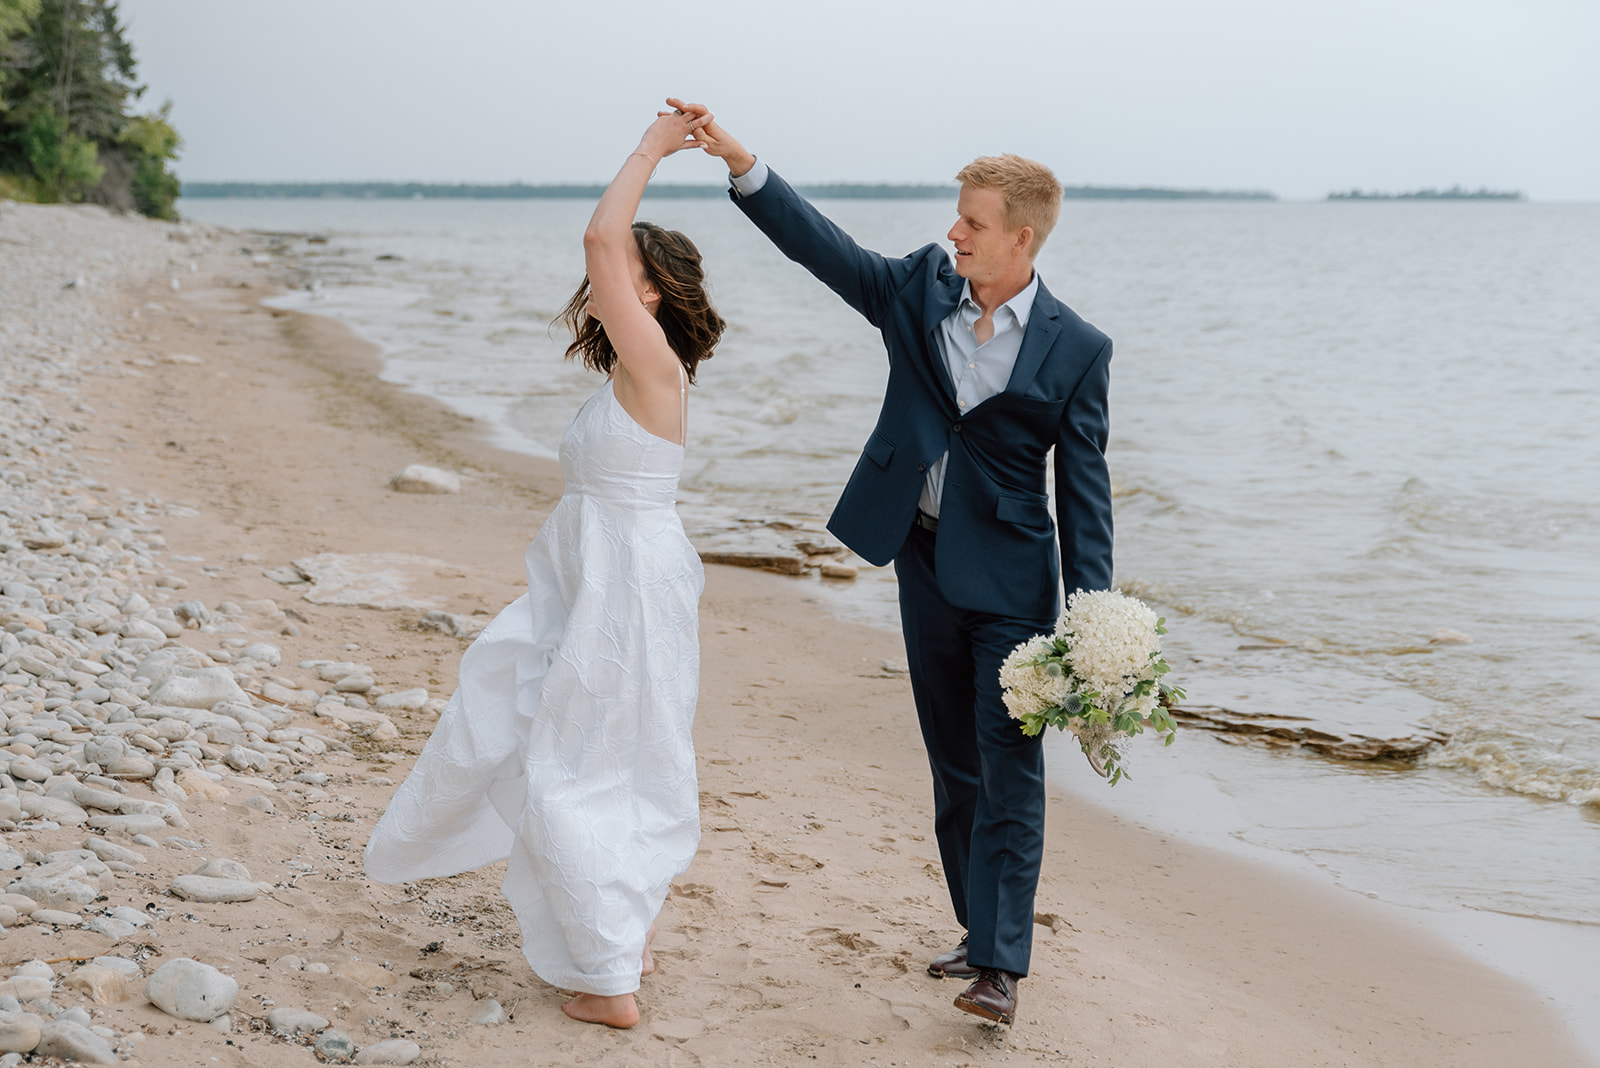 Husband and wife dance on the beach in Baileys Harbor, WI